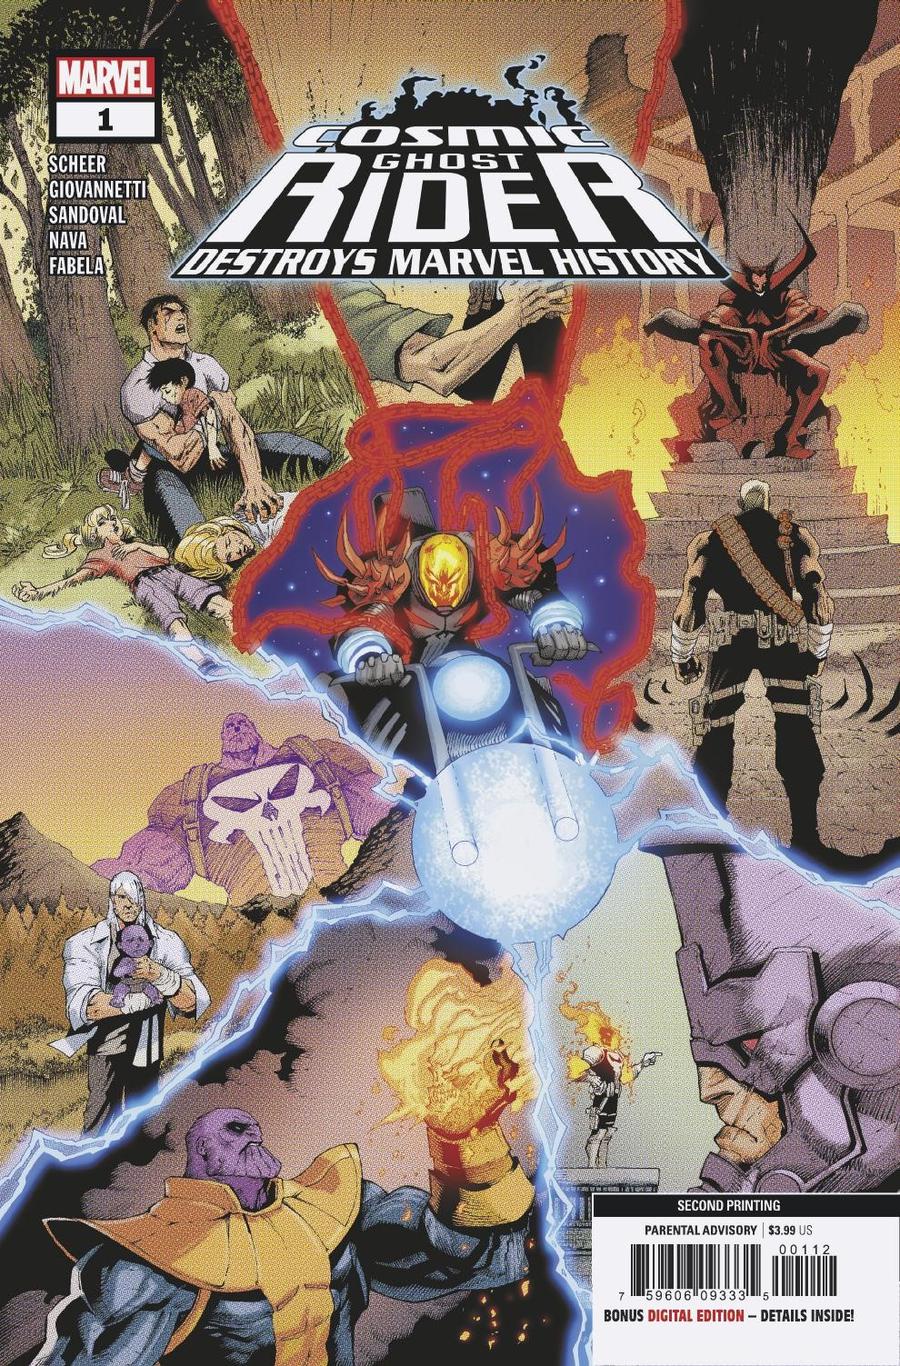 Cosmic Ghost Rider Destroys Marvel History #1 Cover F 2nd Ptg Variant Gerardo Zaffino Cover